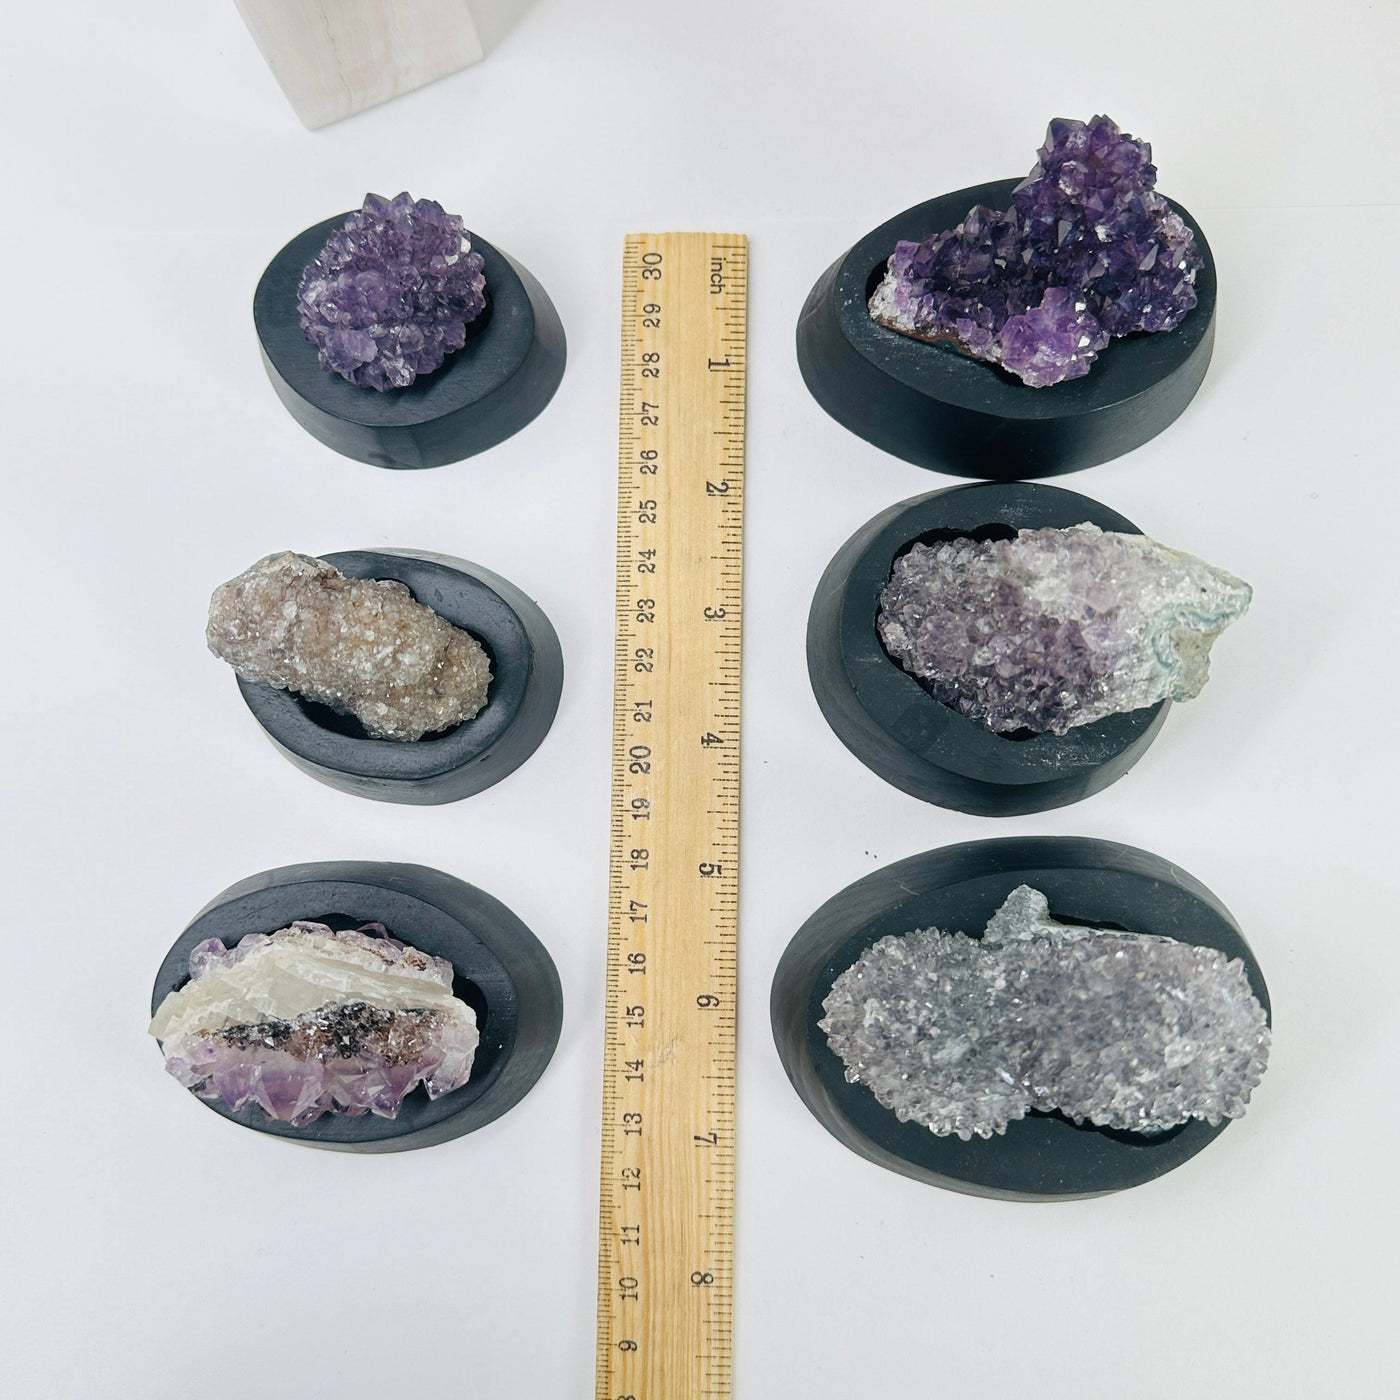 amethyst cluster on stand next to a ruler for size reference